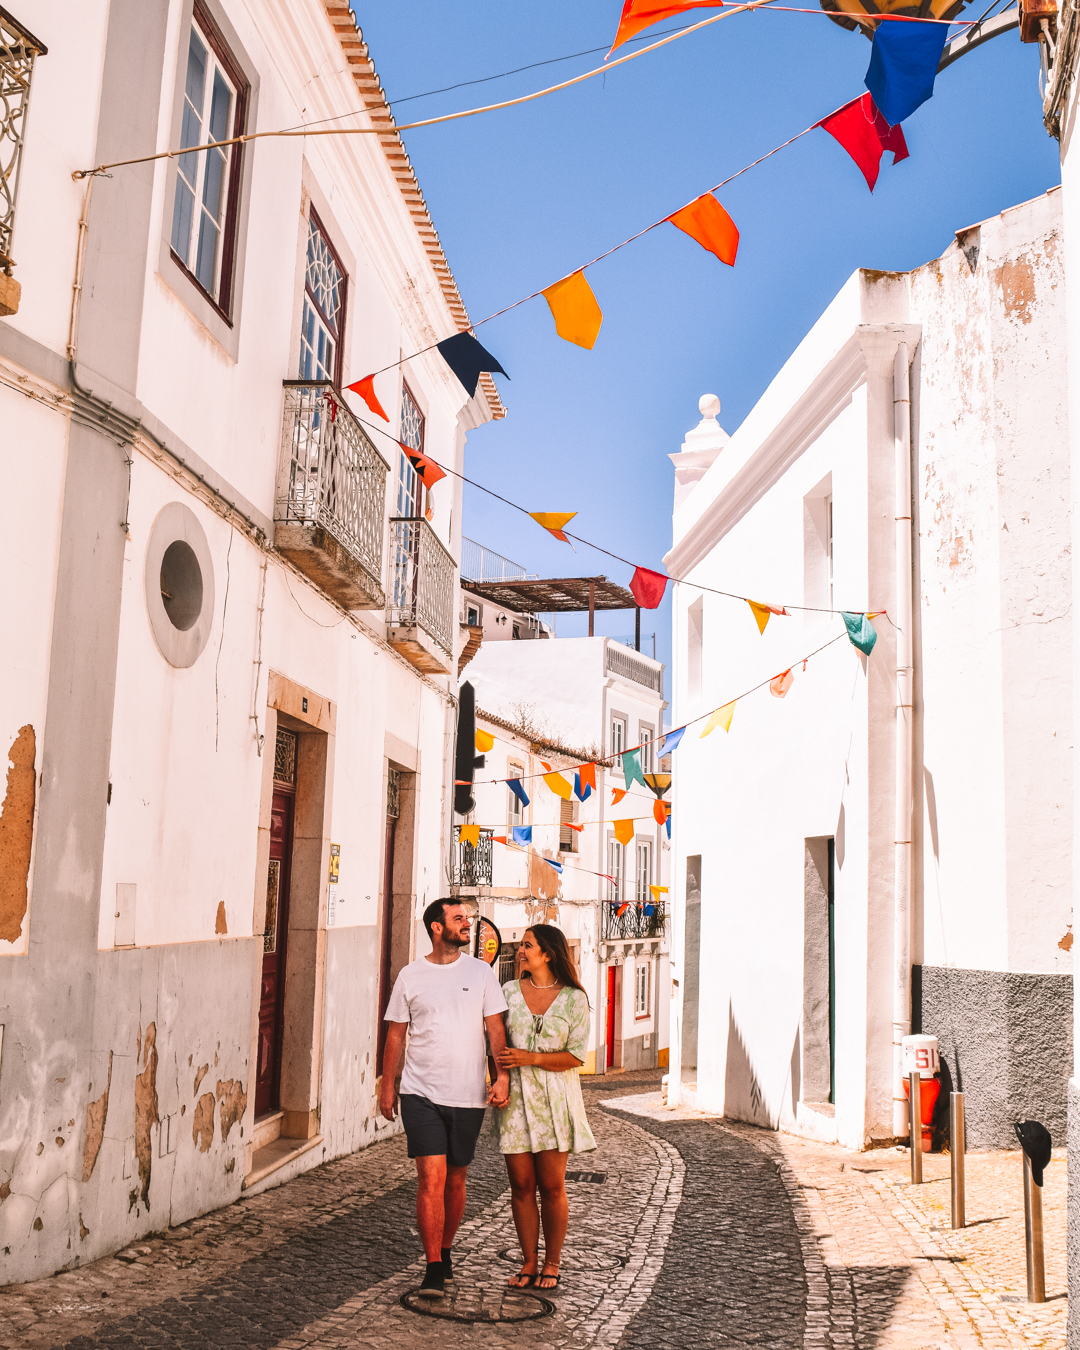 The streets of Lagos town, Portugal